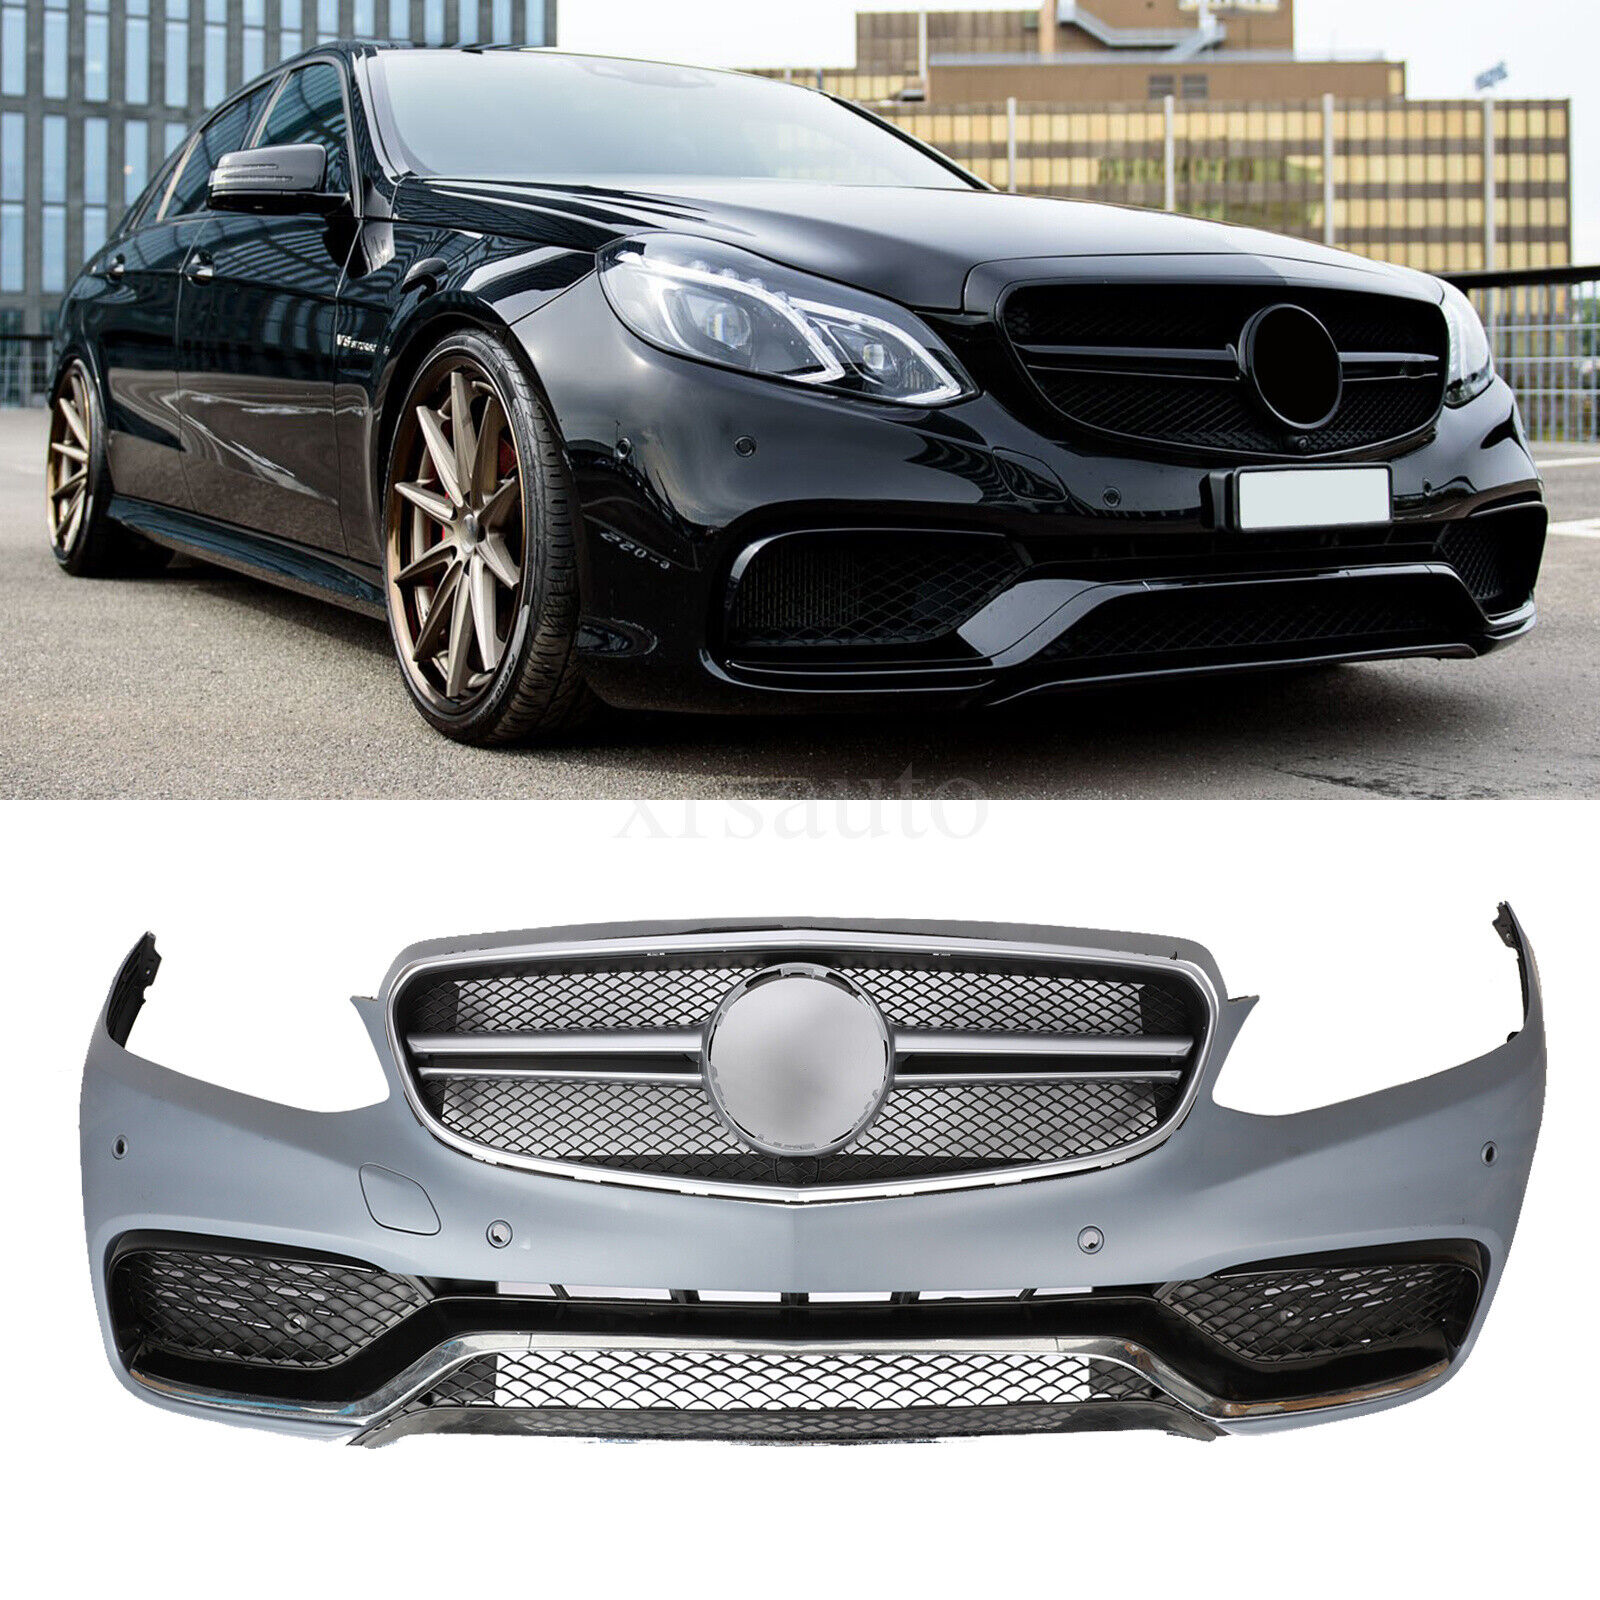 E63 AMG Style Front Bumper Kit W/Grille W/PDC For Mercedes E-Class W212 E350